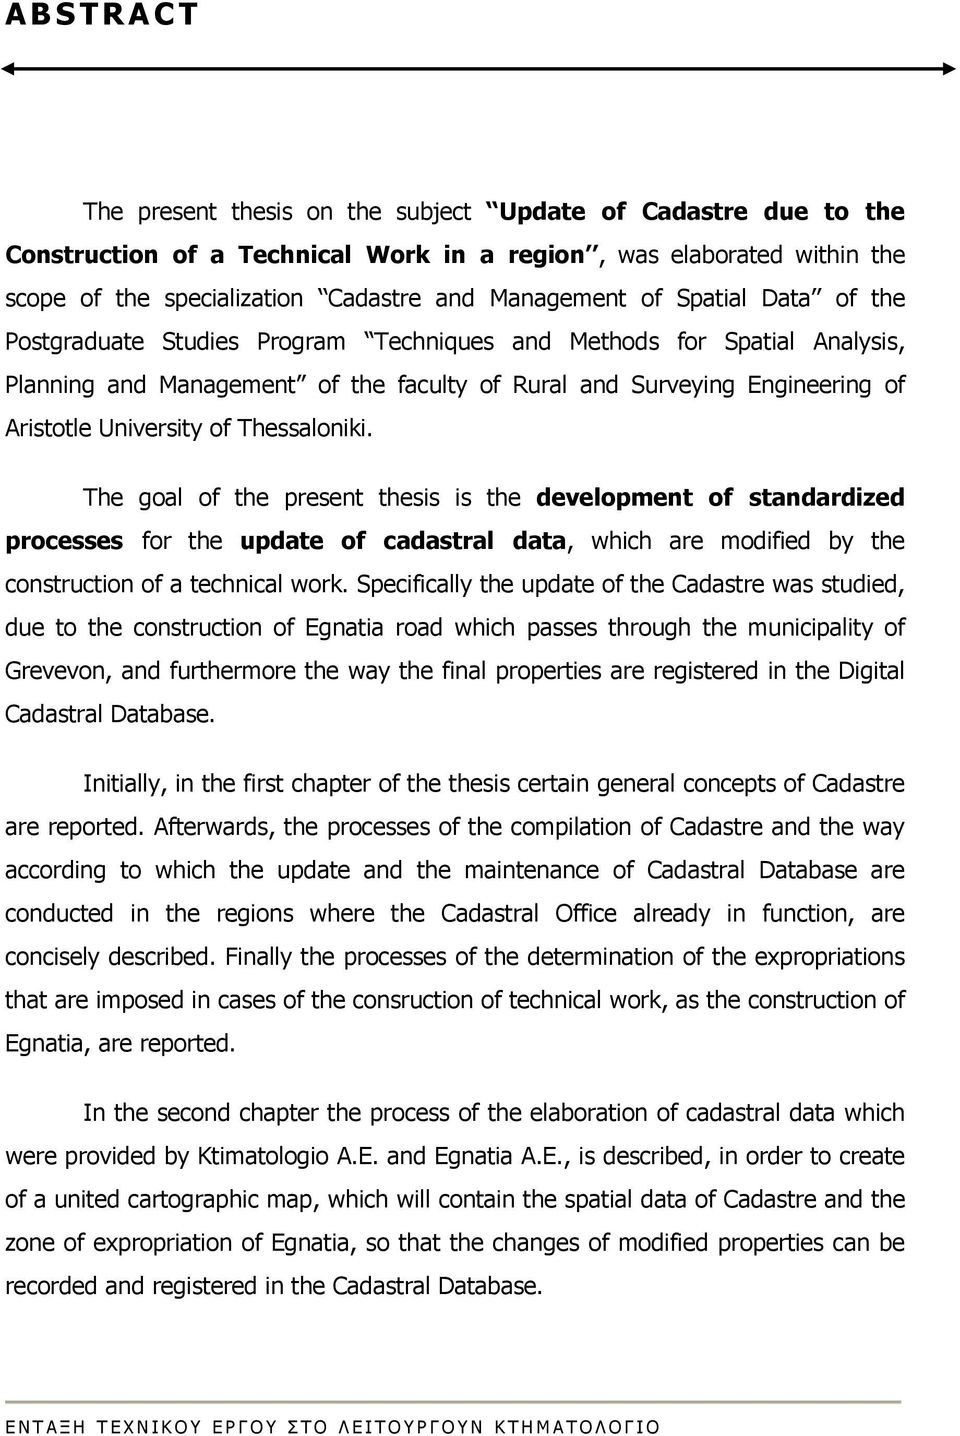 Thessaloniki. The goal of the present thesis is the development of standardized processes for the update of cadastral data, which are modified by the construction of a technical work.